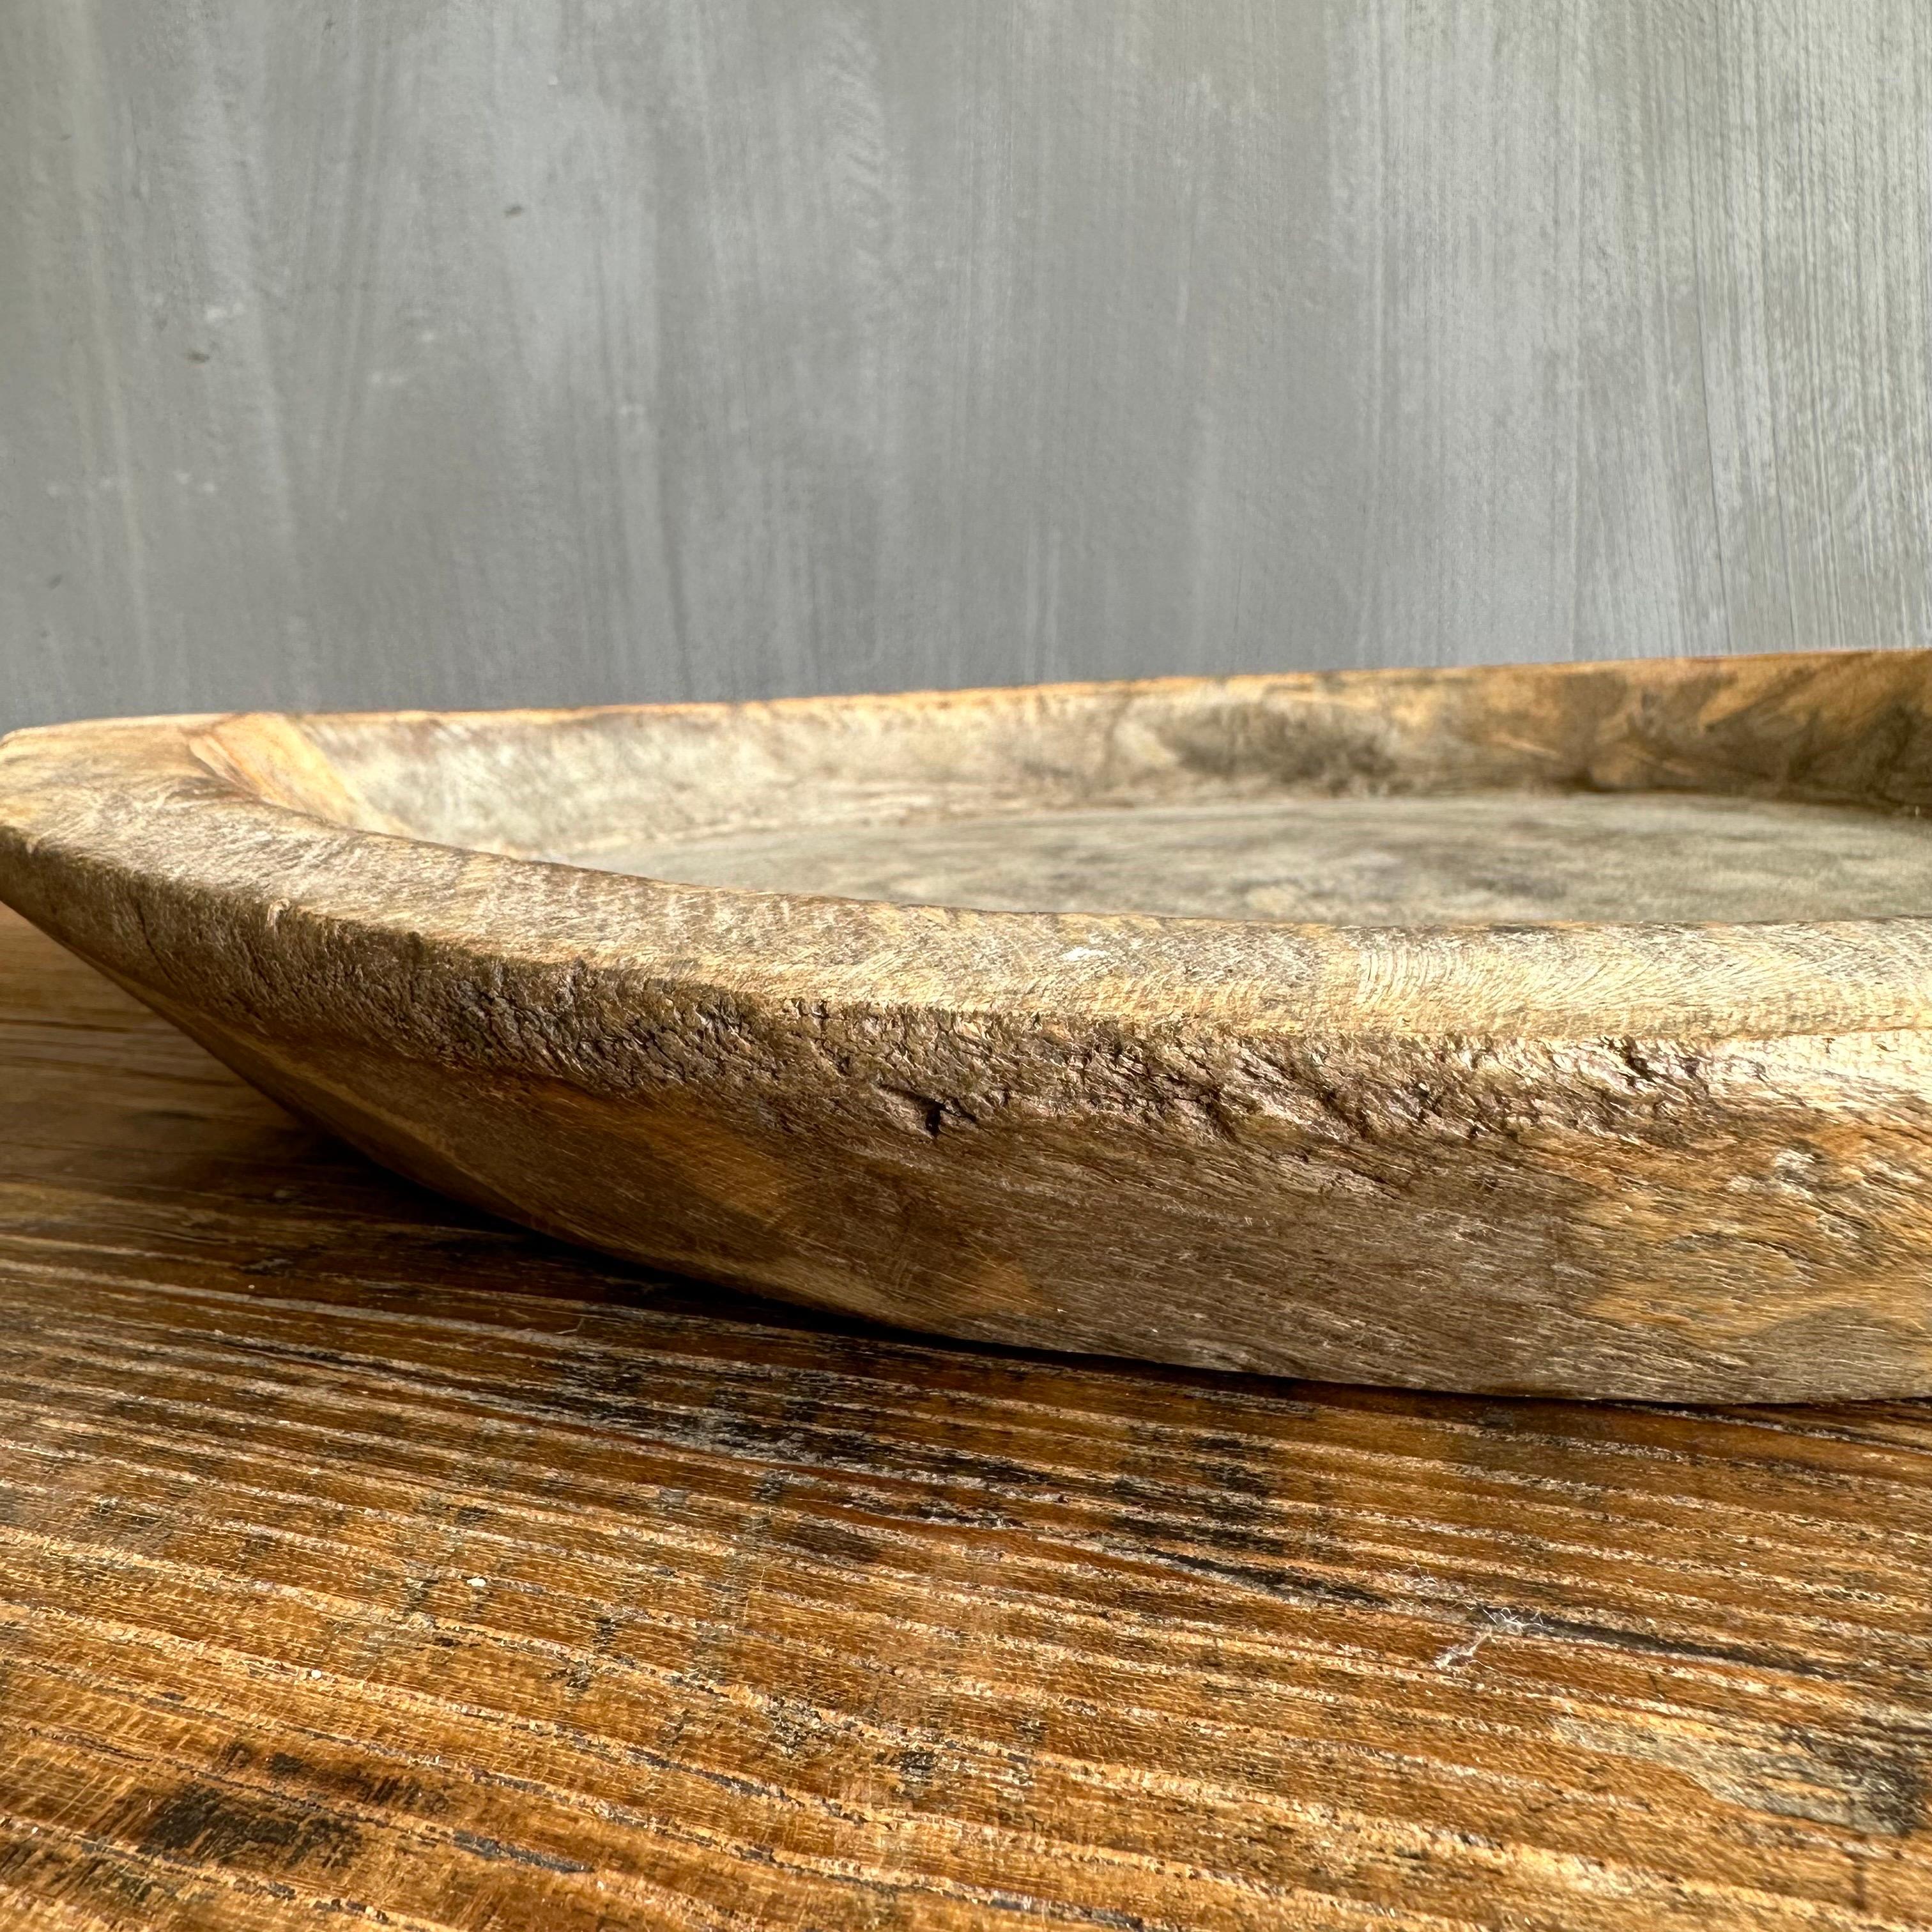 Large vintage decorative bowl. Use for countertops, or as and accent on a wall. Light weight, unfinished wood. Accessories not included. Size: 15” x 14.5” x 2.25”.